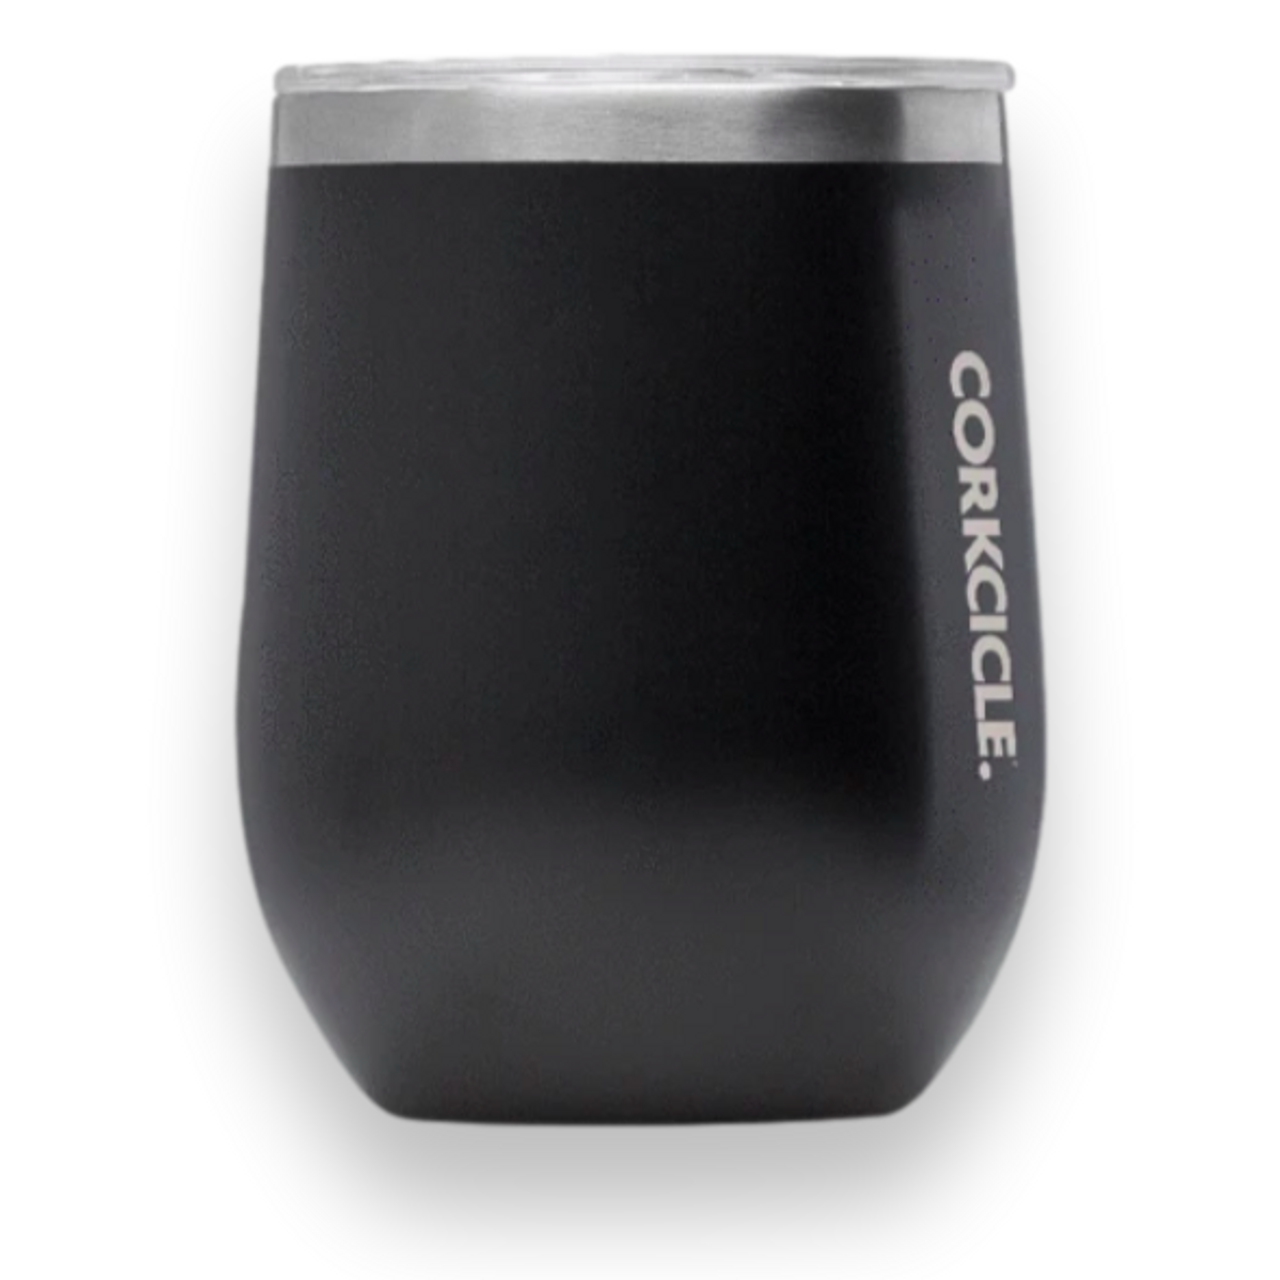 https://cdn11.bigcommerce.com/s-c63ufk/images/stencil/1280x1280/products/1405/7512/Corkcicle-Classic-Stemless-12oz-Wine-Cup-Black-2312MB-Exterior-Front-1_clipped_rev_1__85840.1612782682.png?c=2